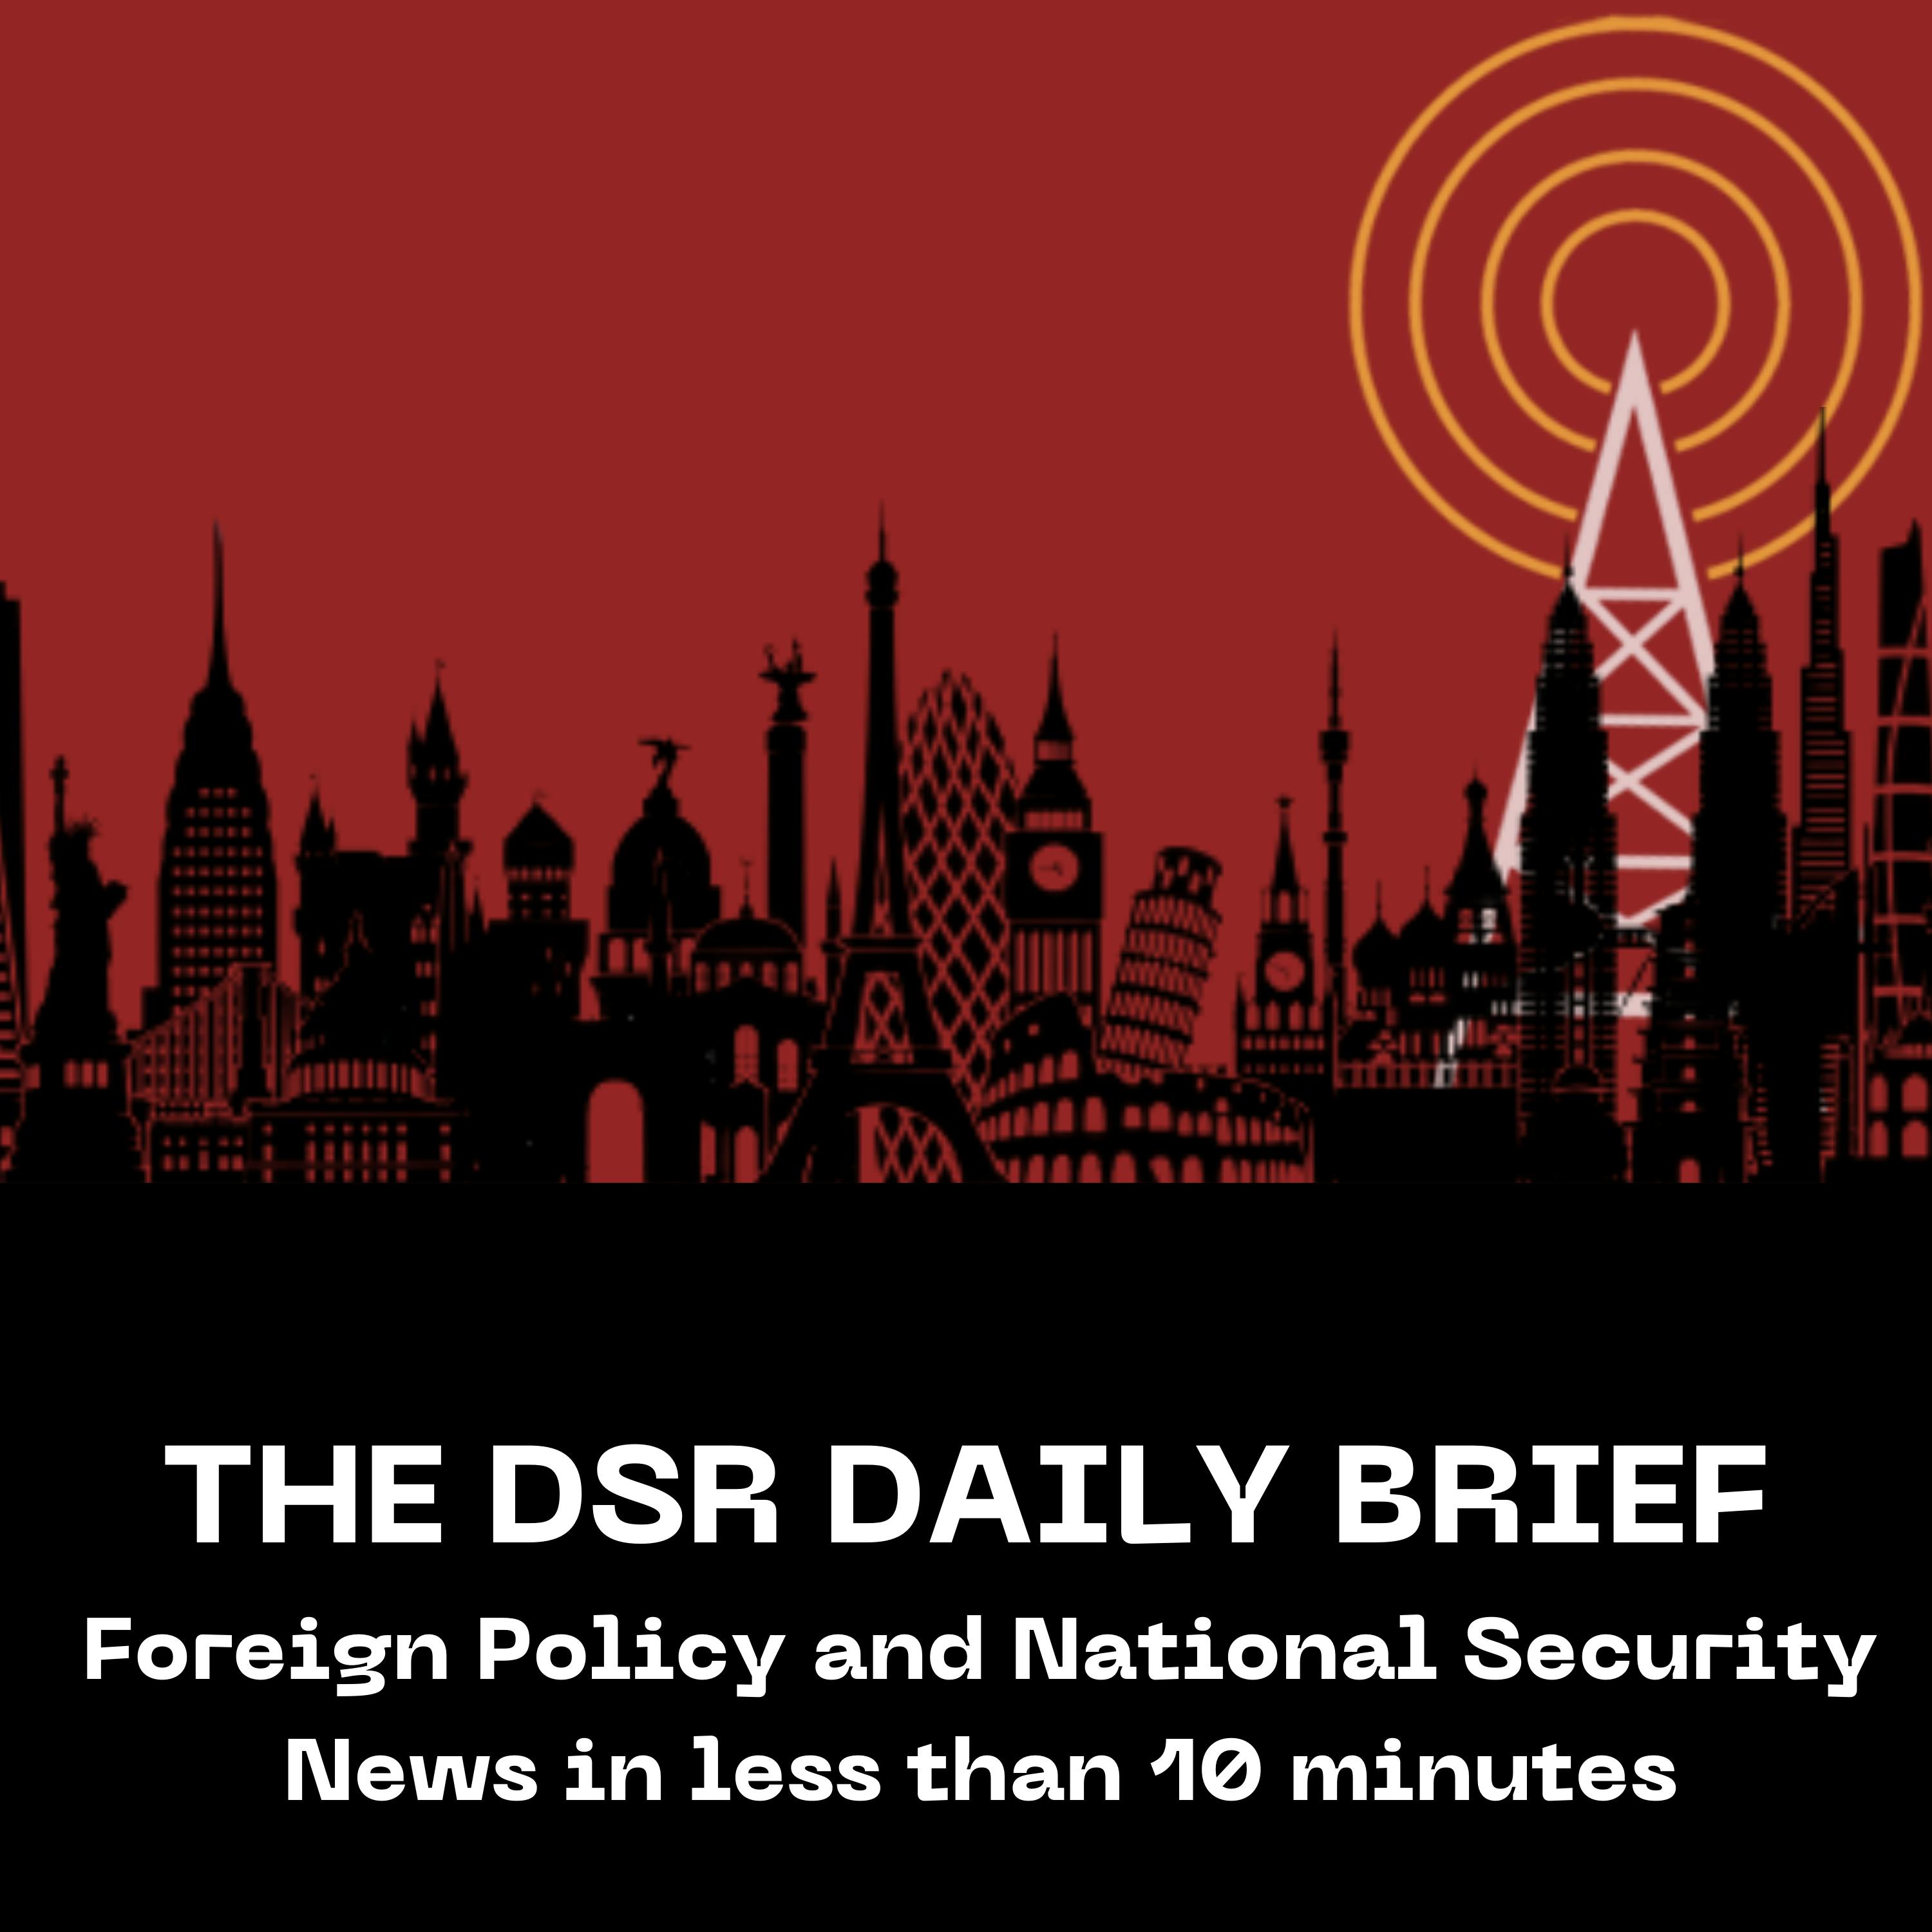 The DSR Daily for April 3: Taiwan Hit by Massive Earthquake, Biden and Xi Hold Talks